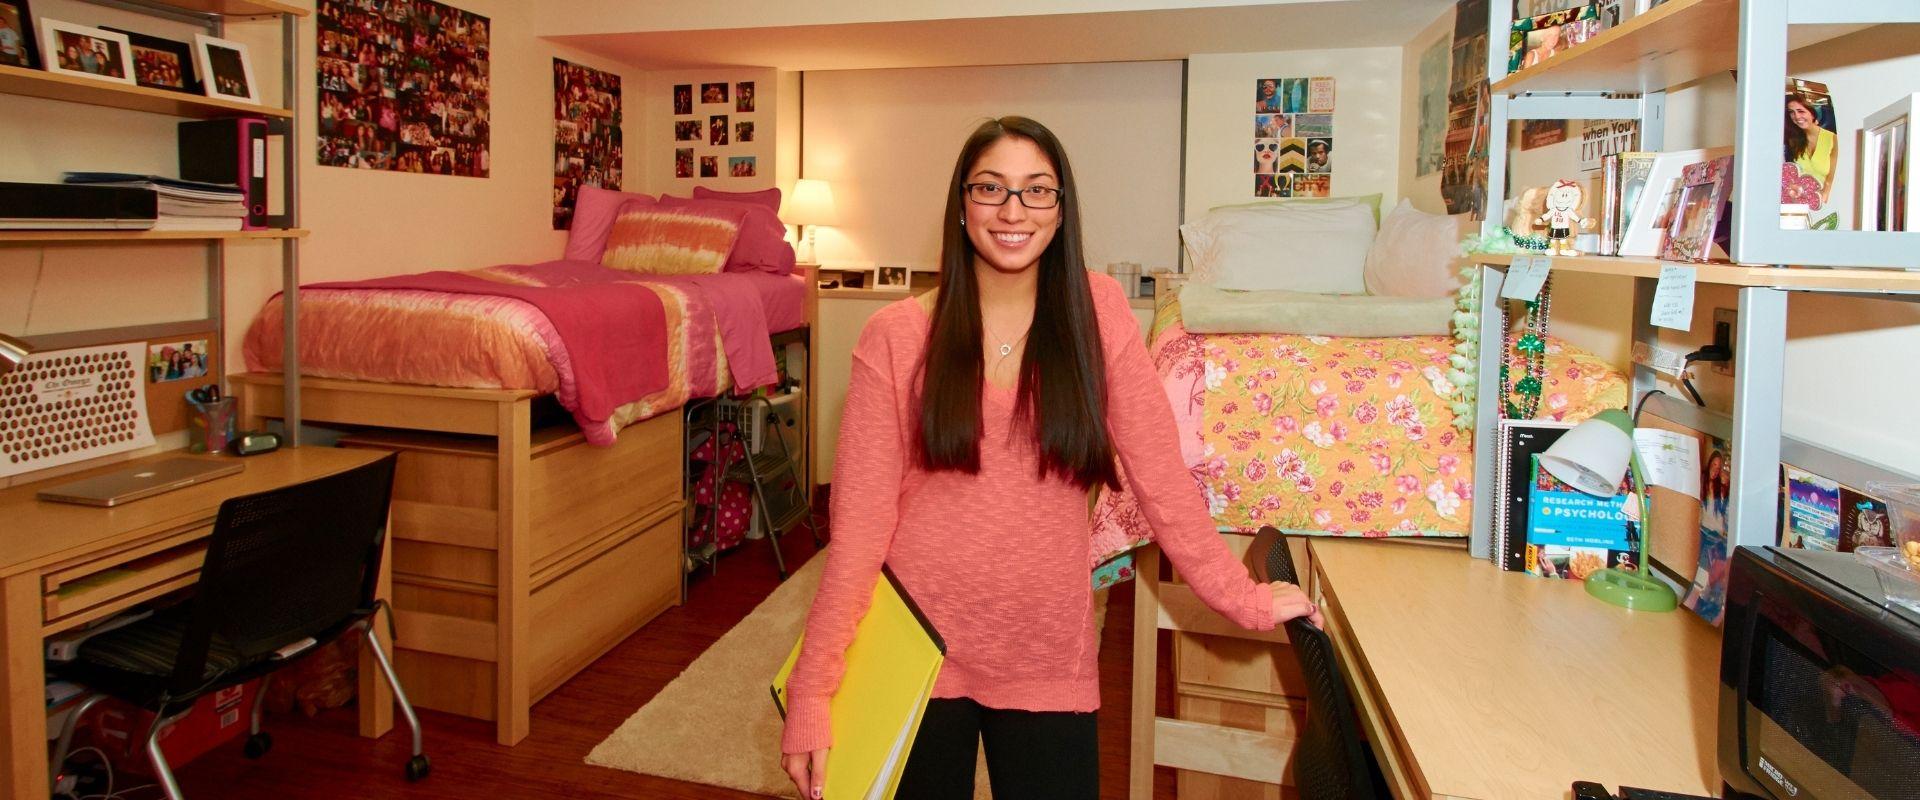 female student standing in front of beds in residence hall